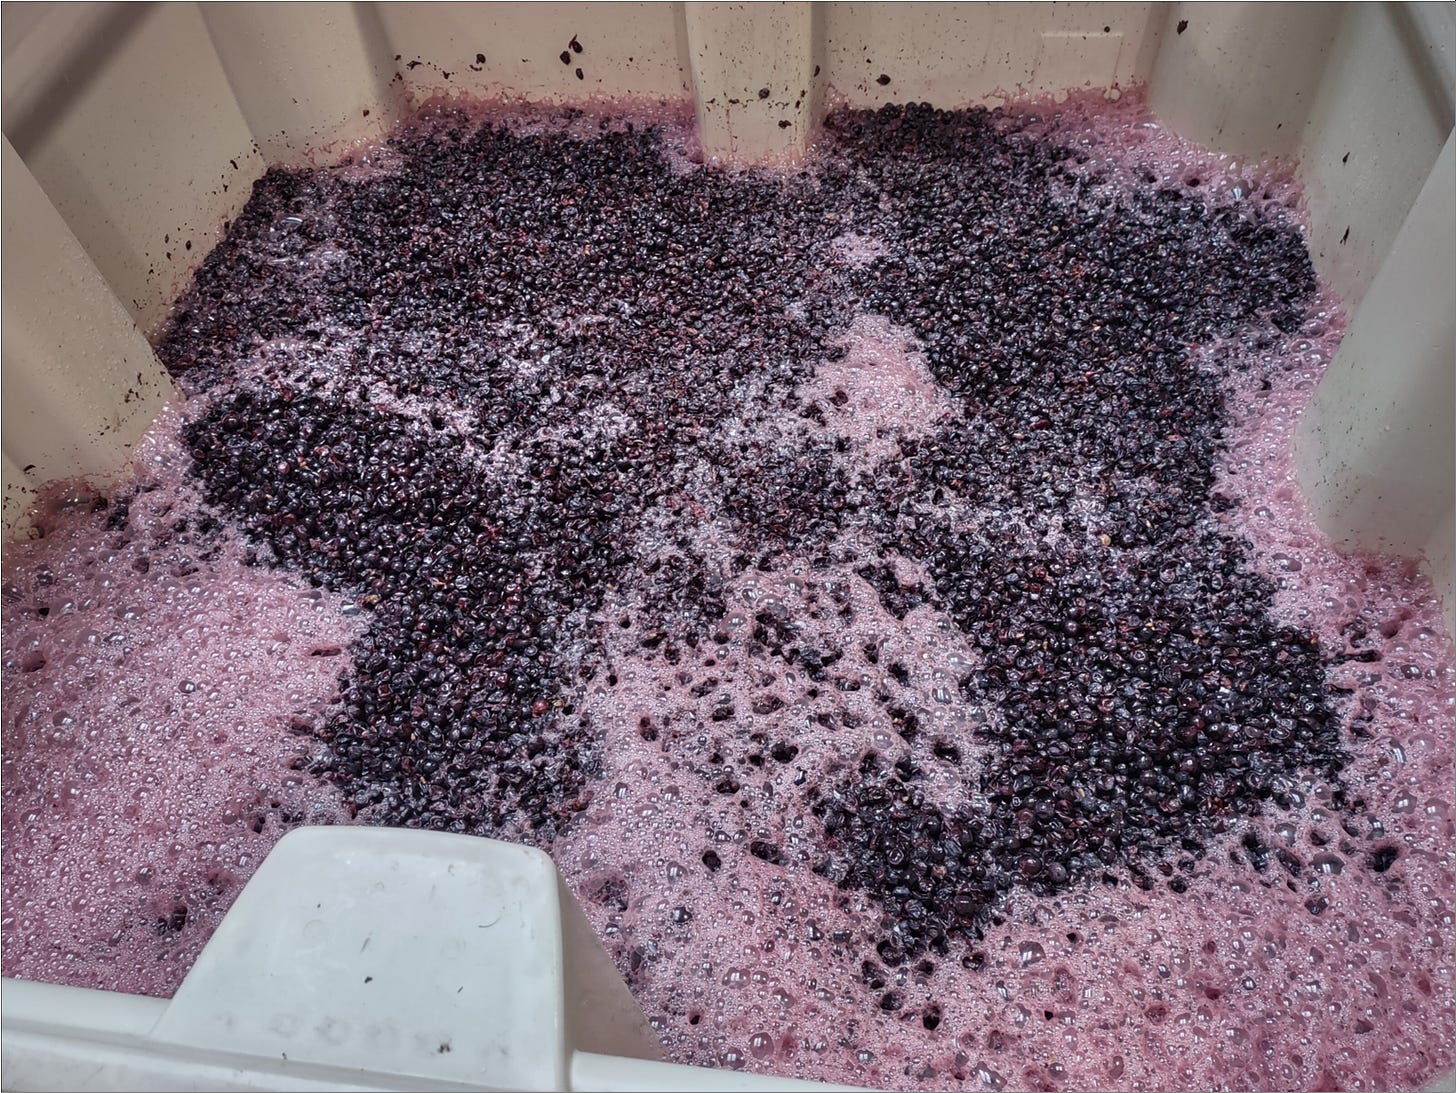 Fermenting Amalie Robert Pinot Meunier, you should see what it smells like from here!